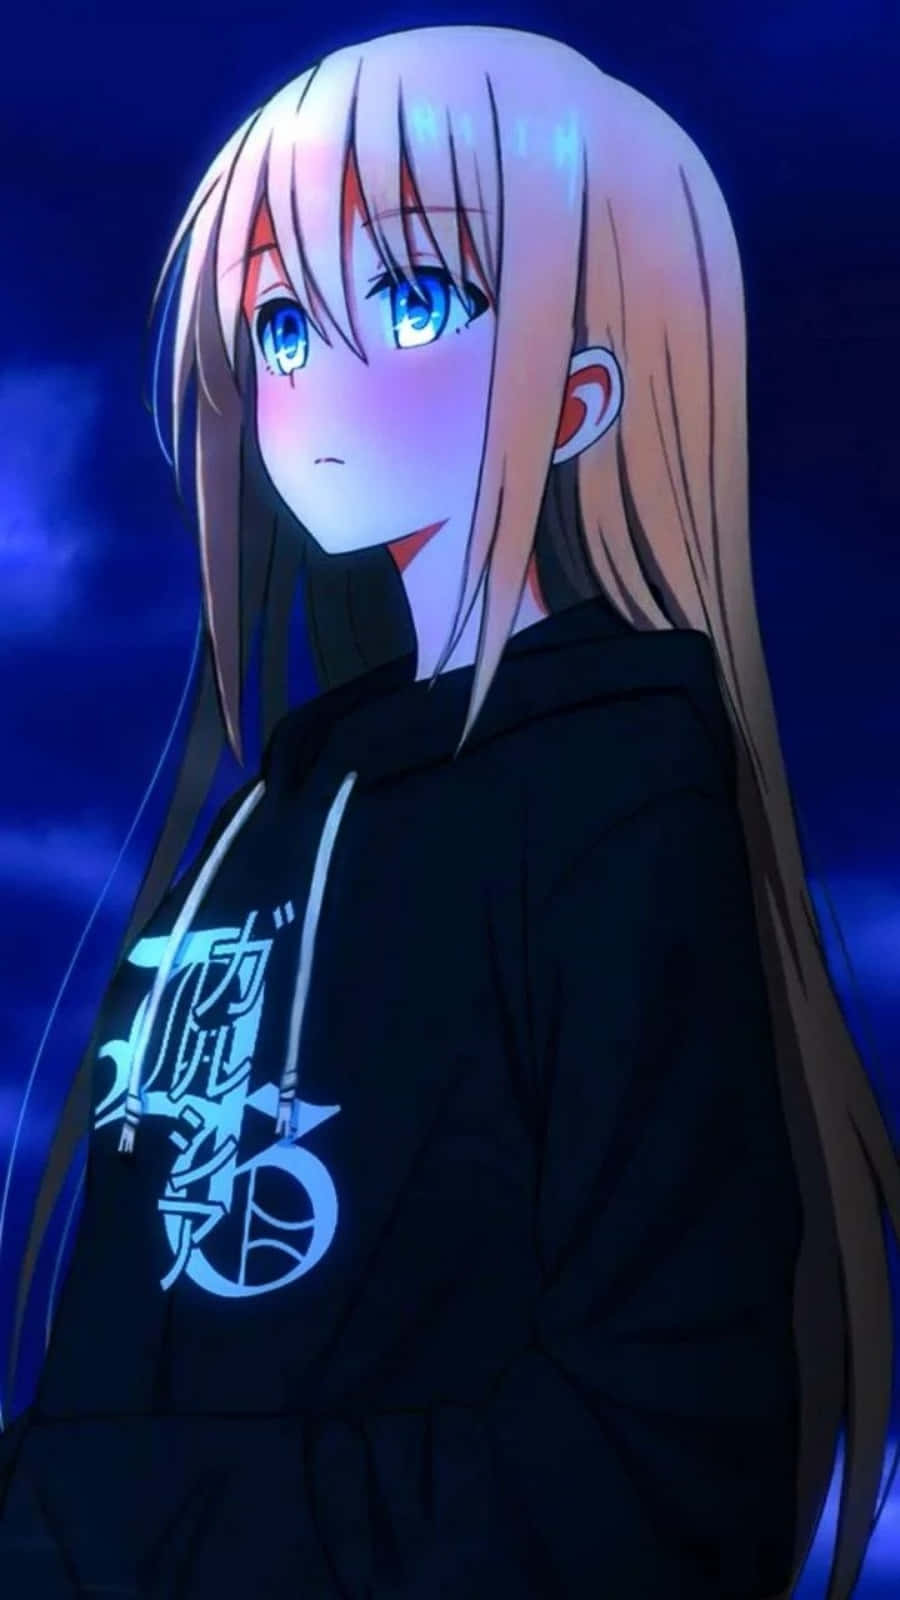 Get ready to show off your style in this cute Anime Girl Hoodie!